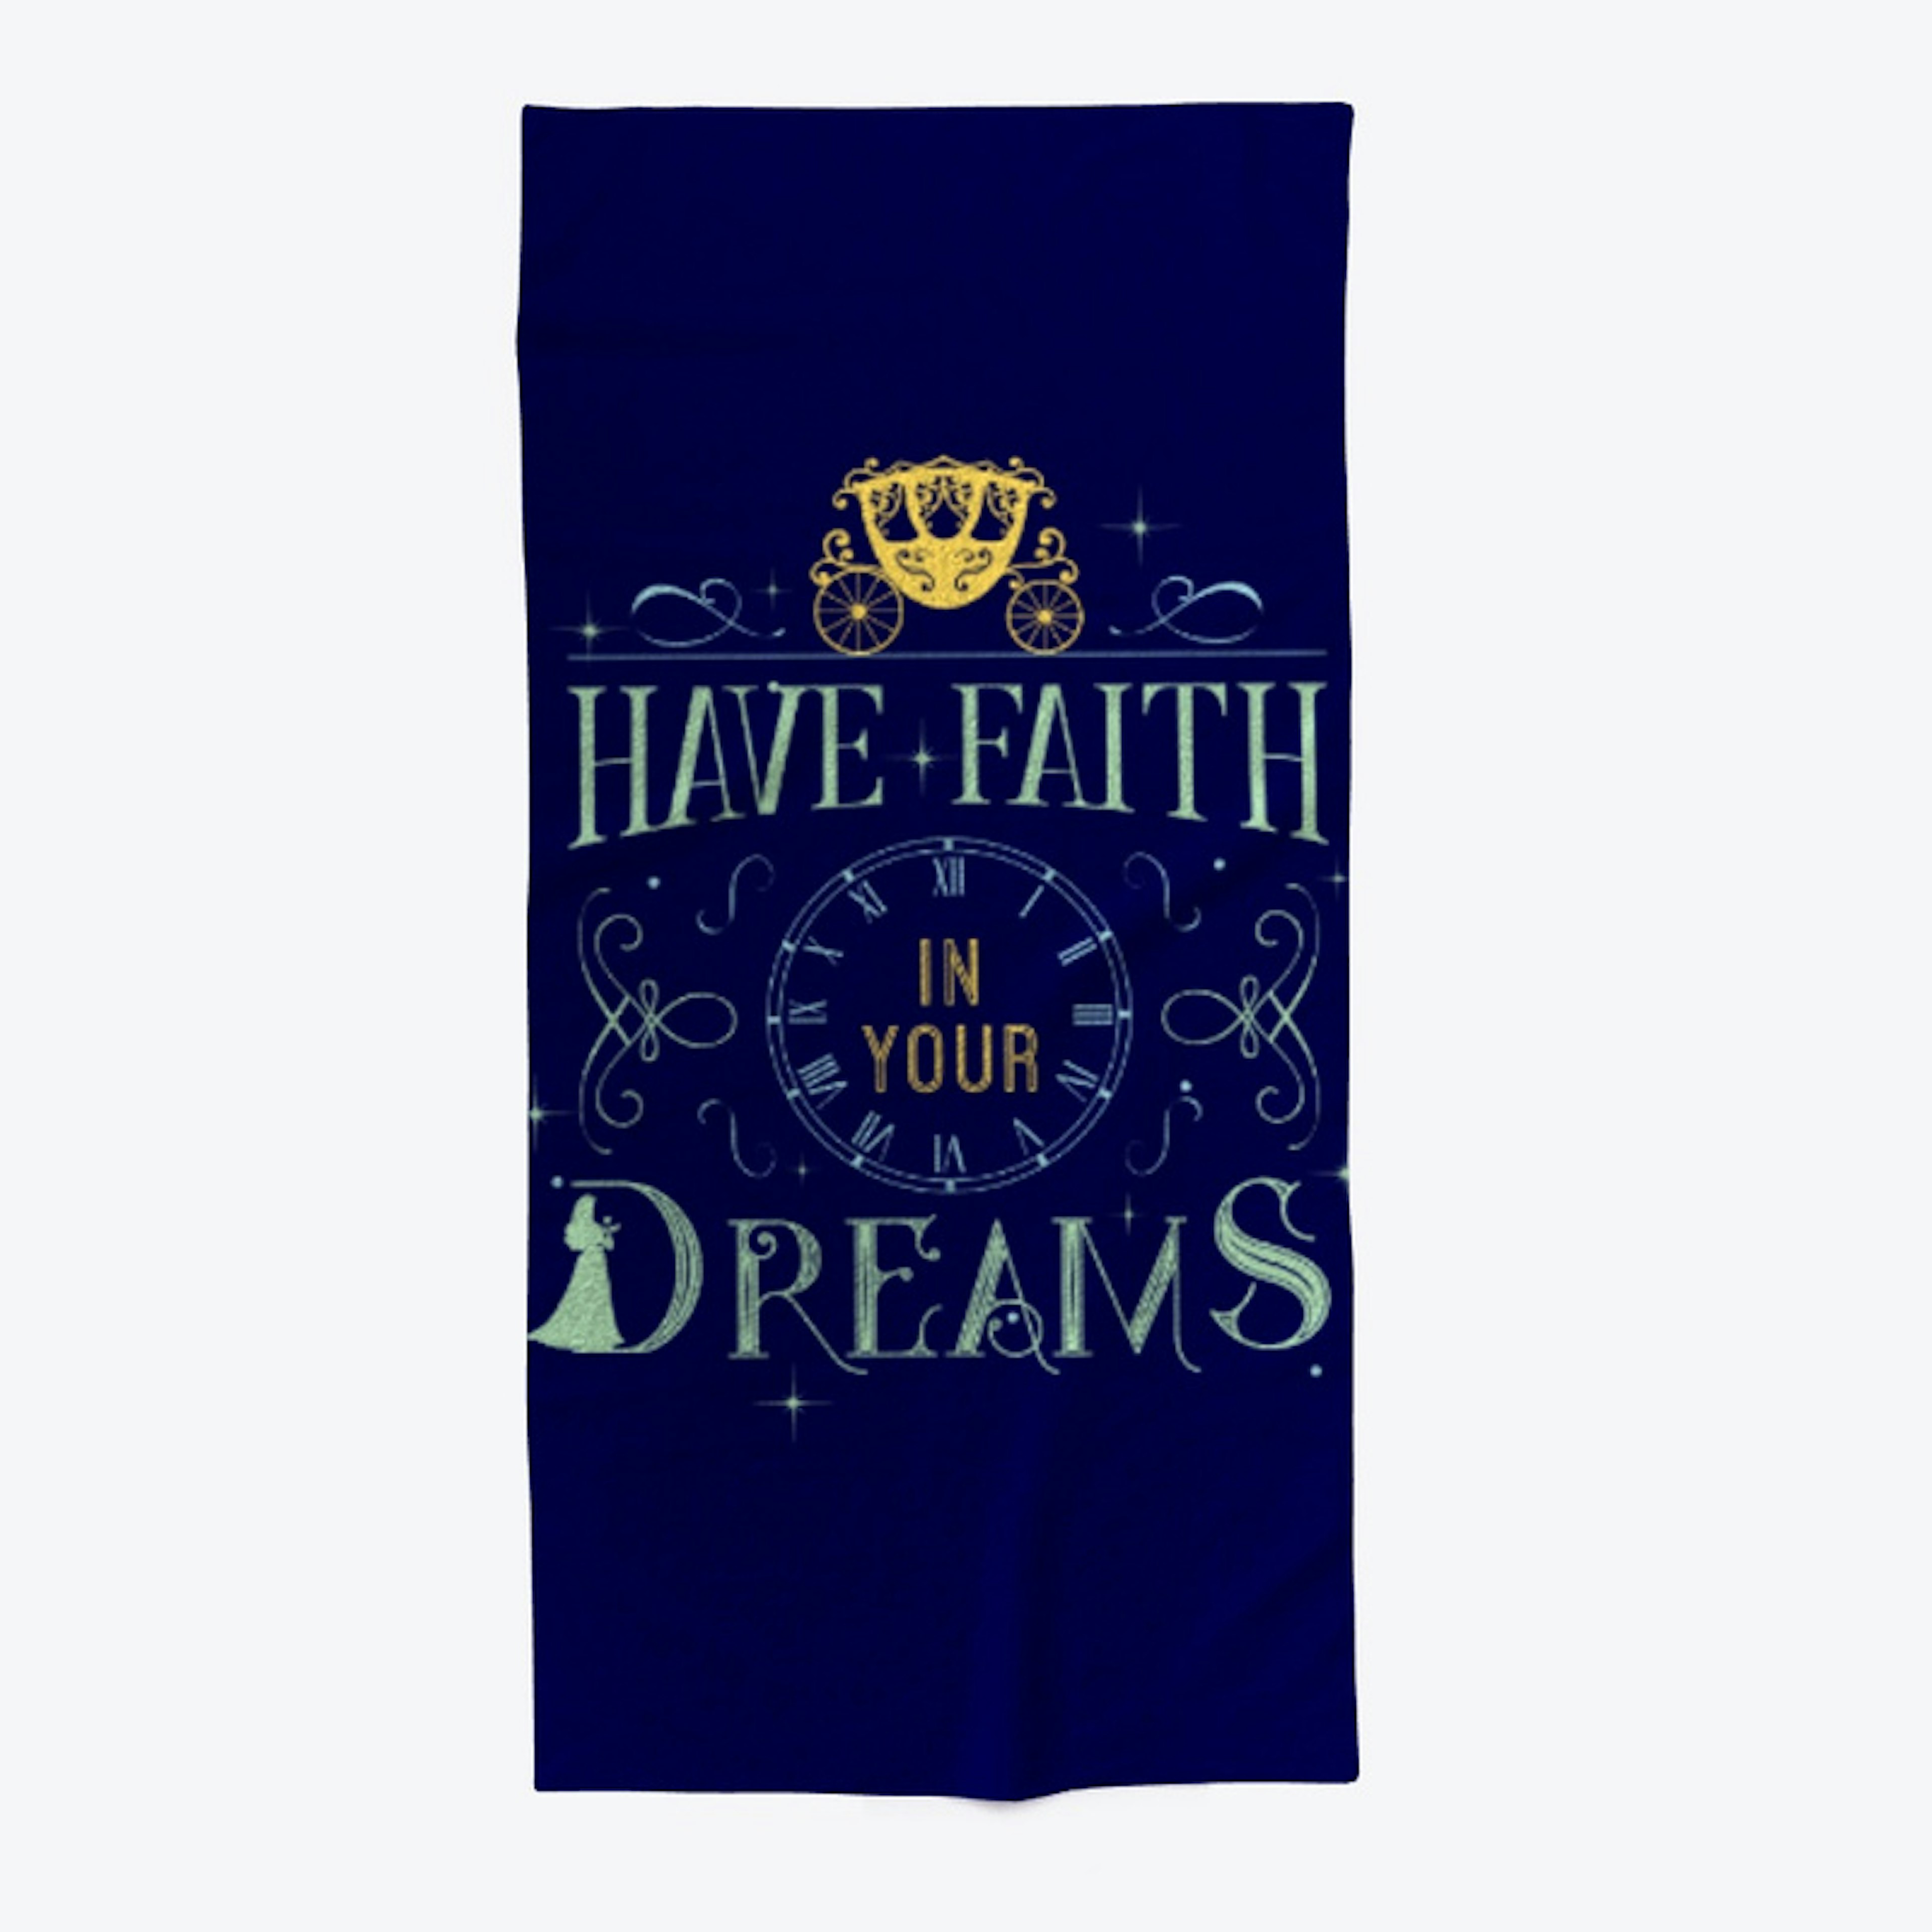 Have Faith in your Dreams V.1 :)